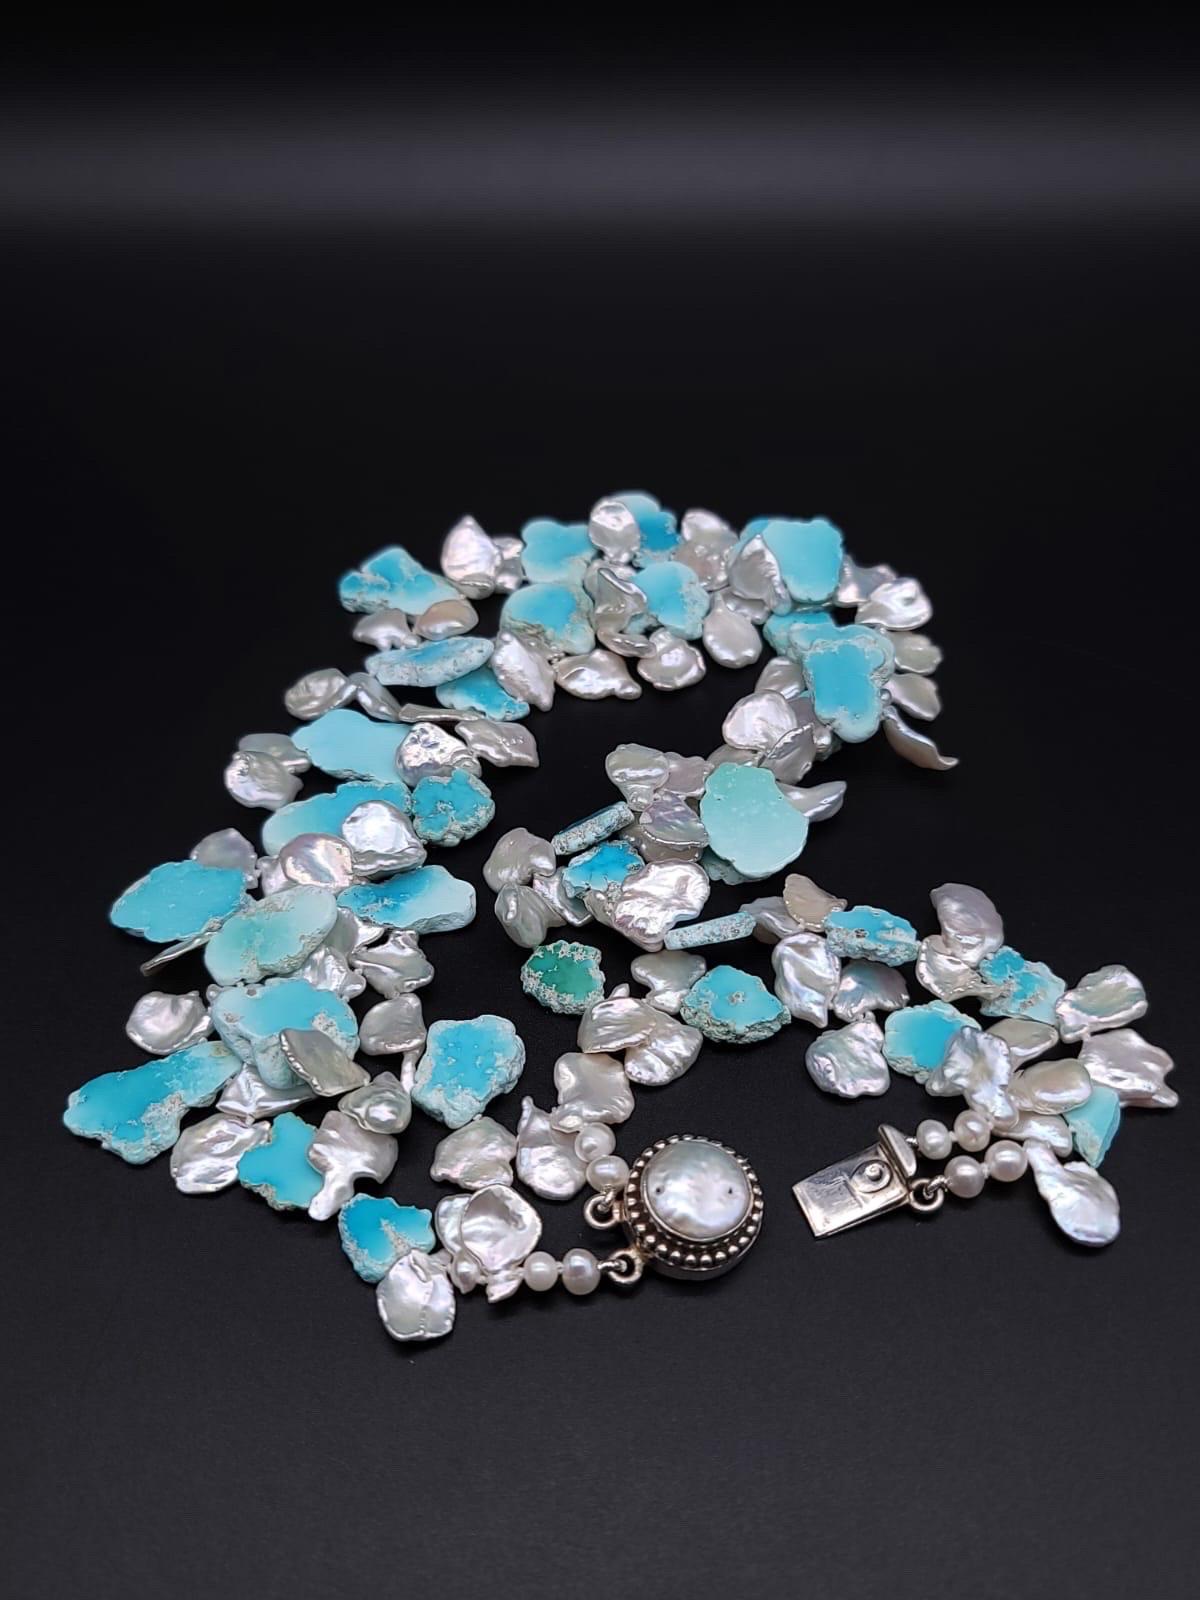 A.Jeschel  Larimar and Keshi Pearls combine in a heavenly 2 strand necklace For Sale 10